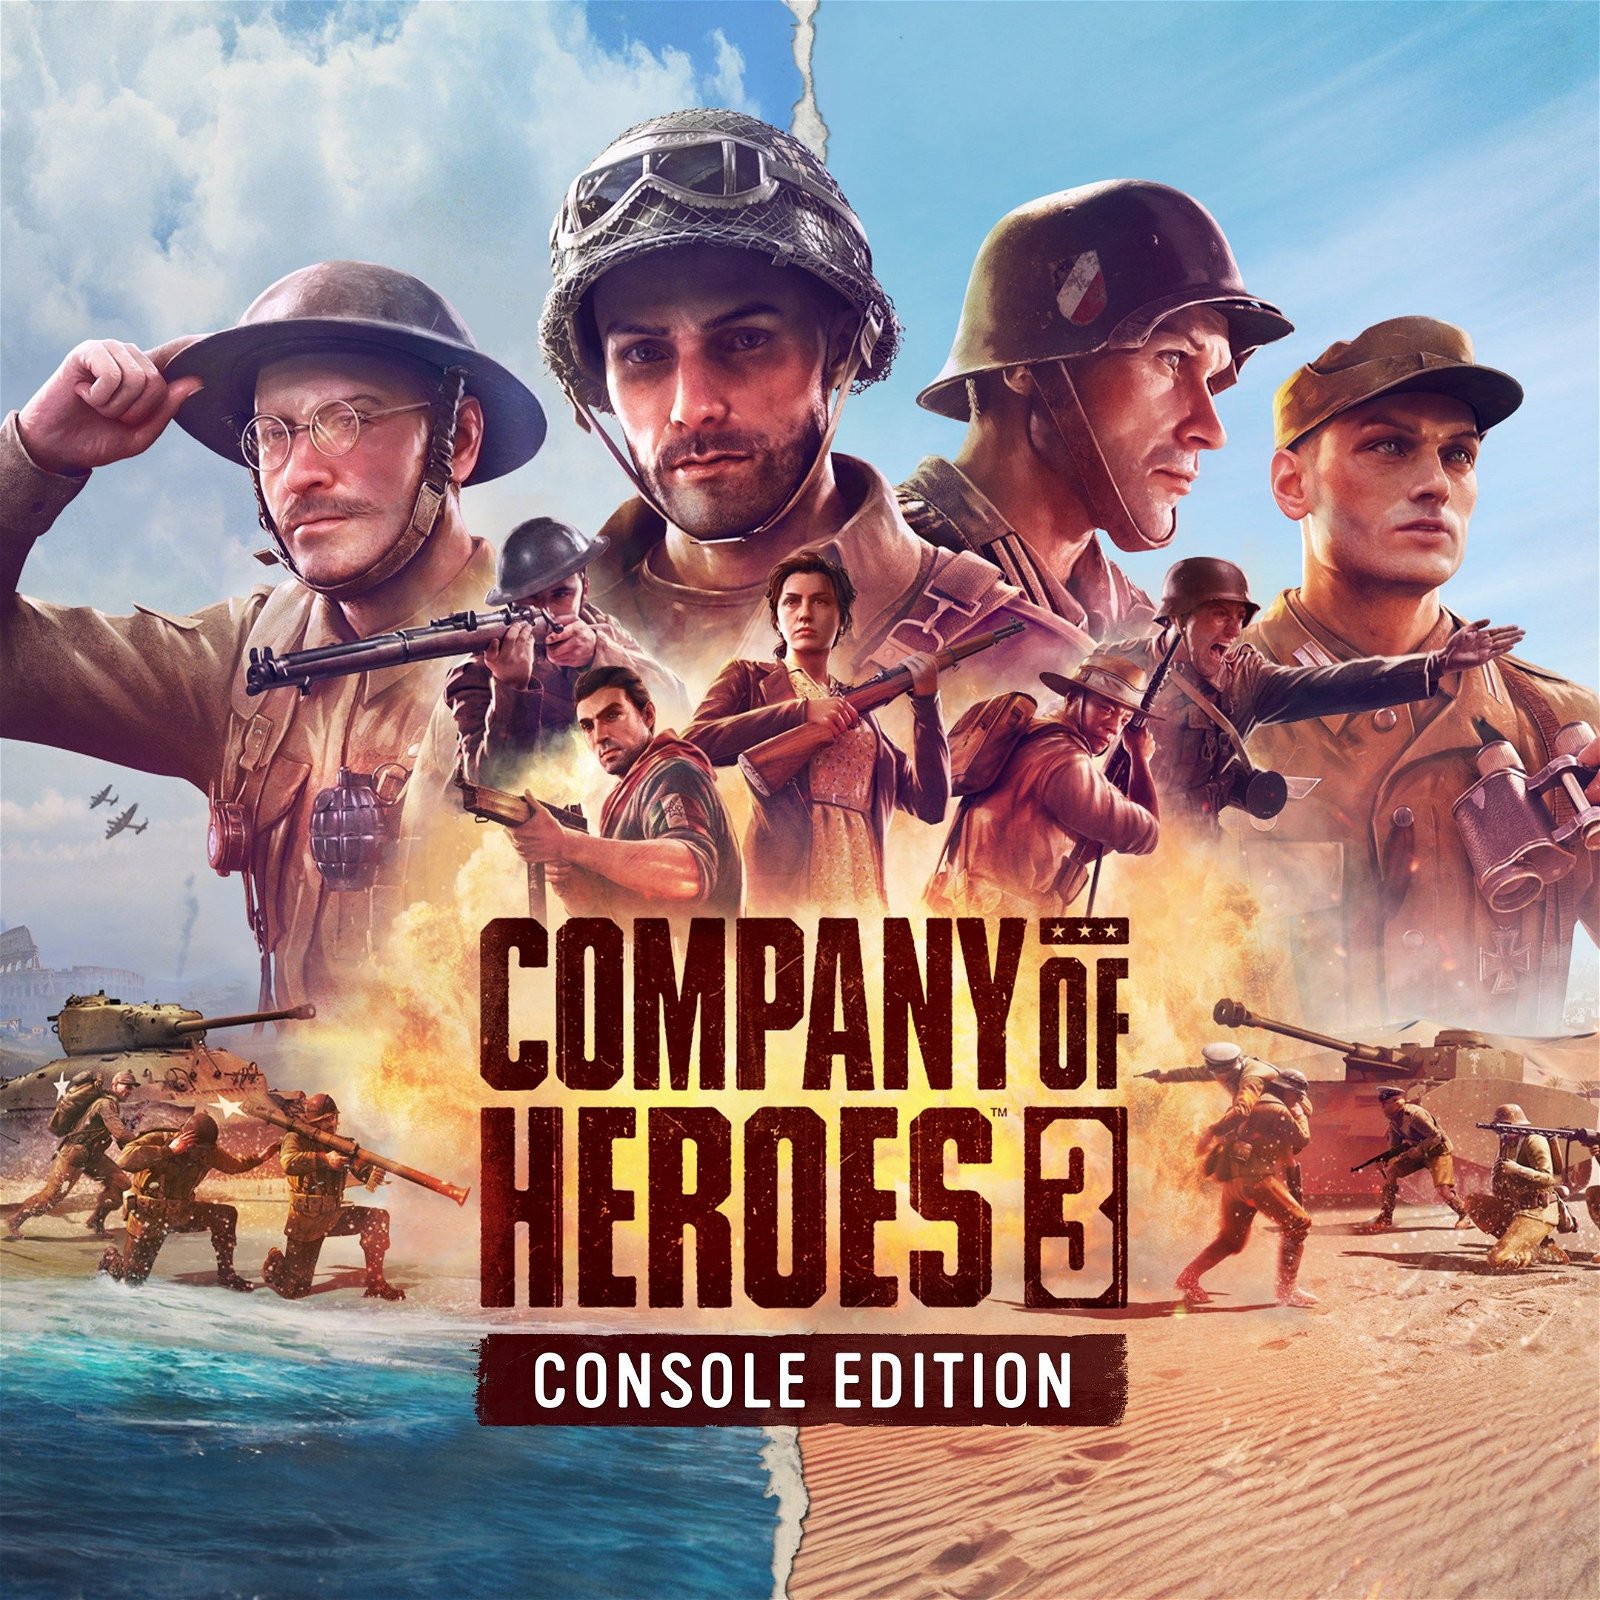 Image of Company of Heroes 3